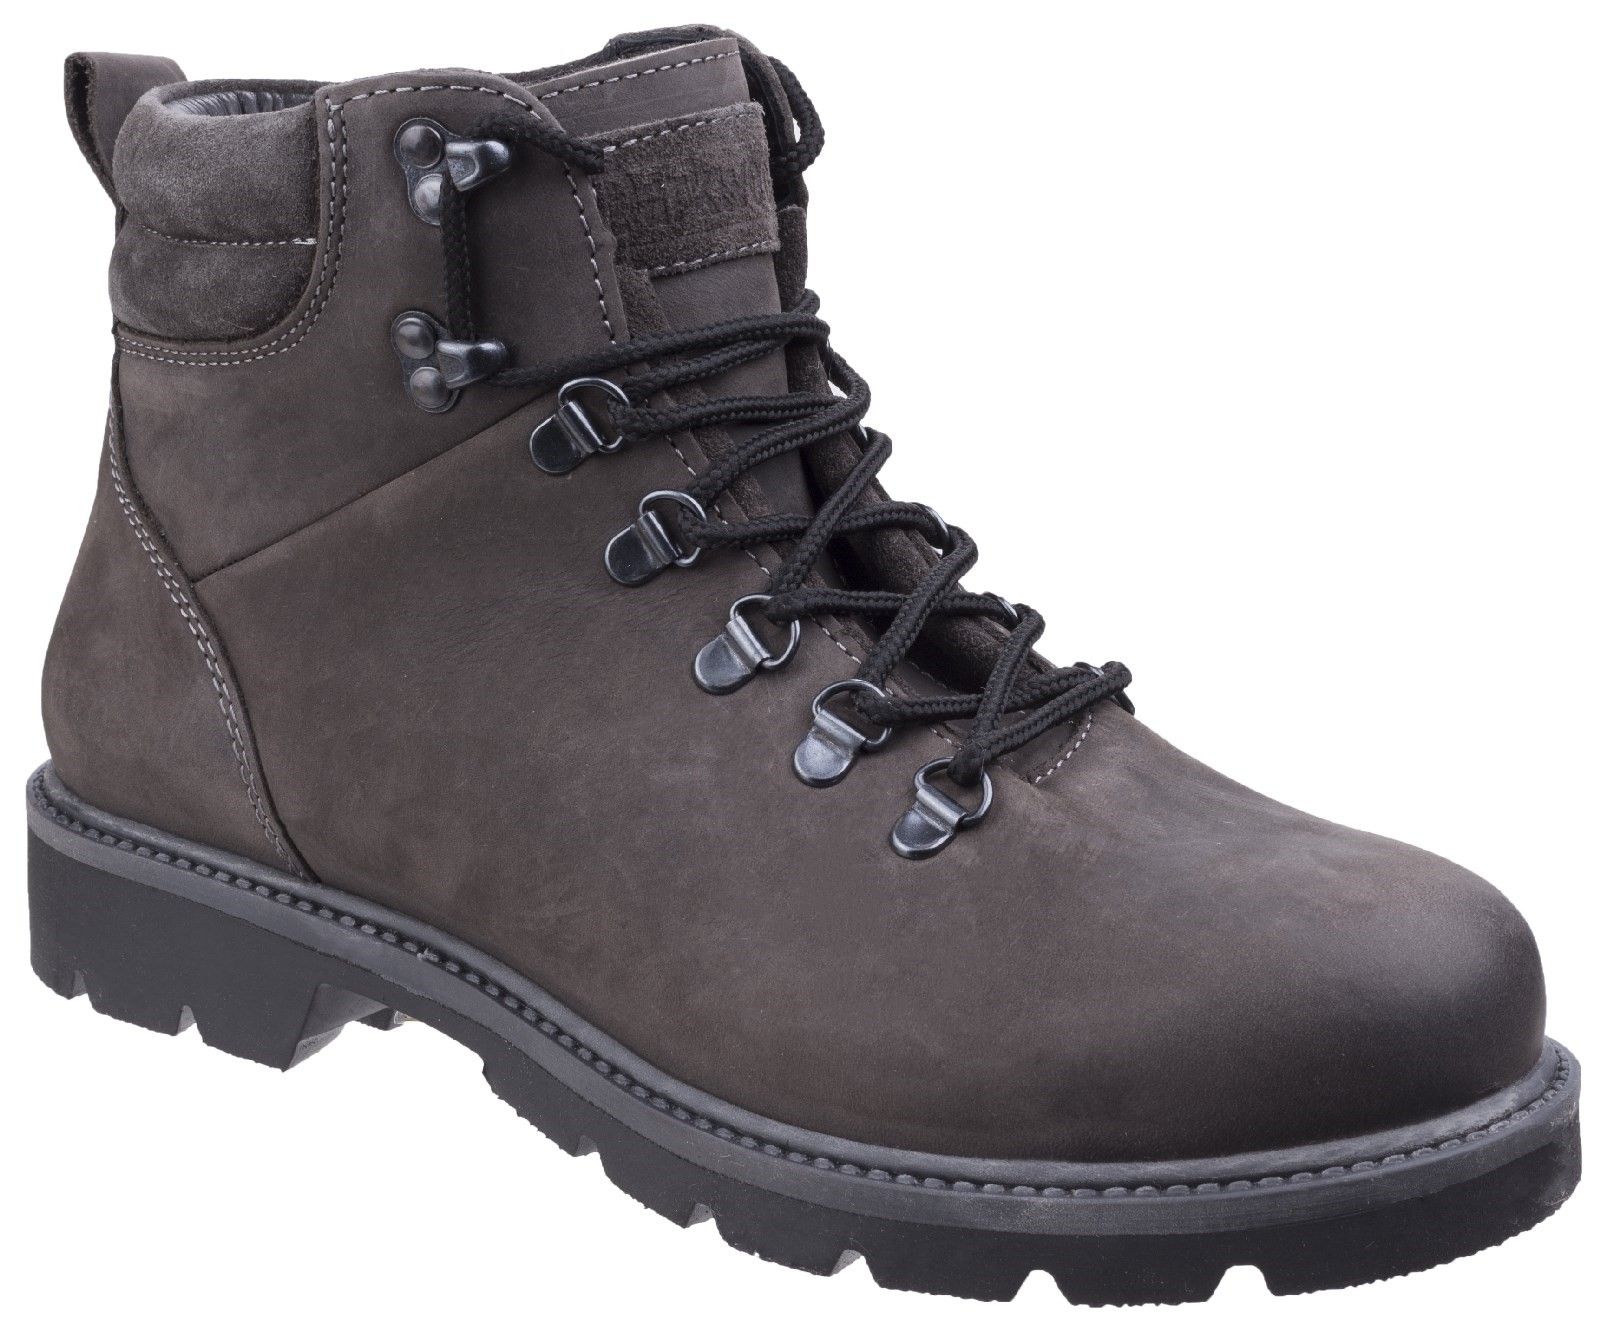 Darkwood boots with classy design, featuring water-resistant membrane. Perfect for hiking and cold weather conditions. Mens water-resistant casual boot. 
Warm-Lining. 
Ideal for autumn and winter. 
Water-resistant genuine leather. 
Good level of puncture resistance against brambles.